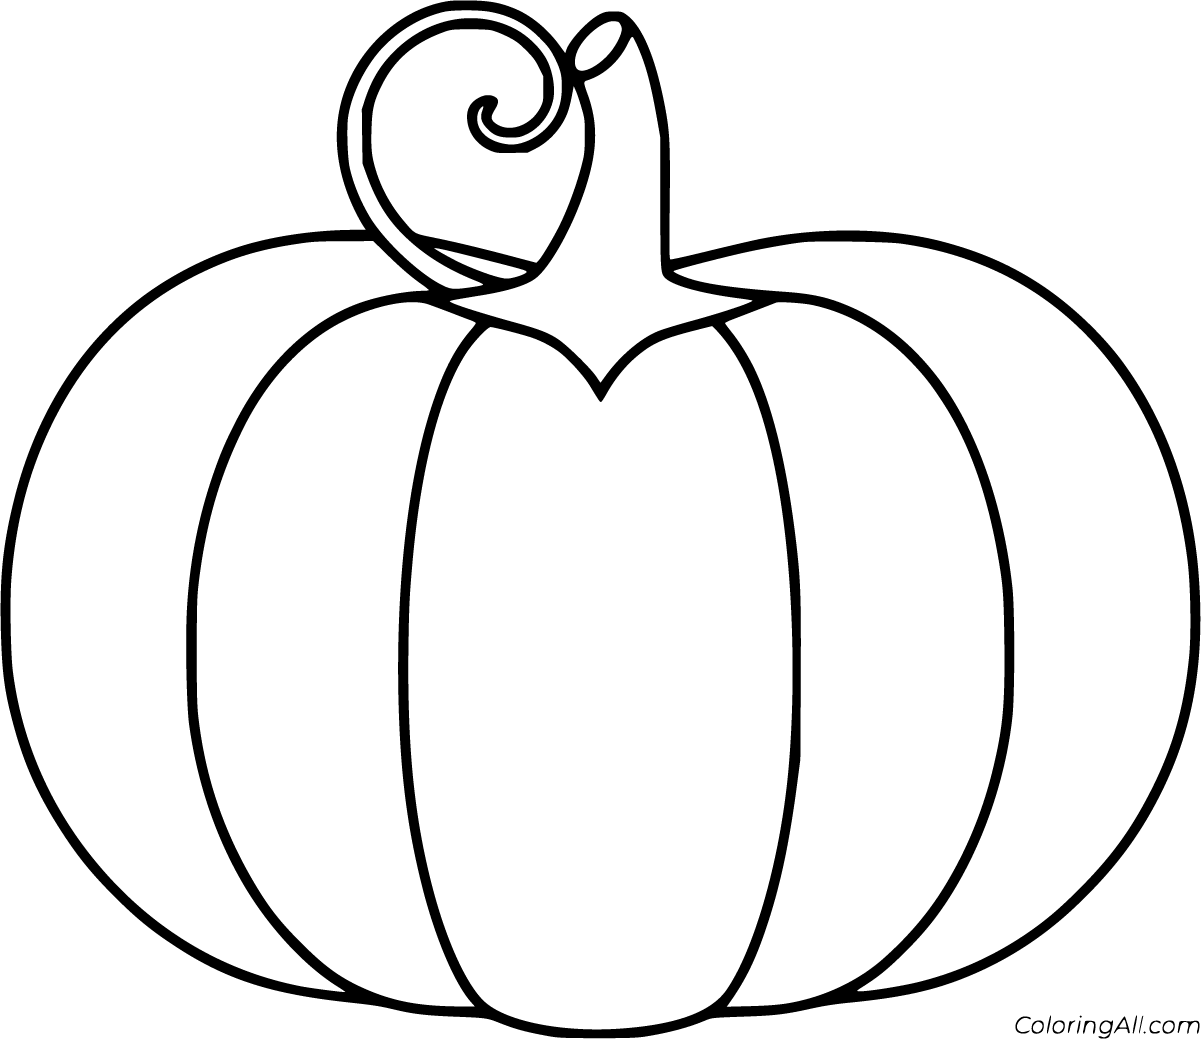 Download Pumpkin Coloring Pages - ColoringAll